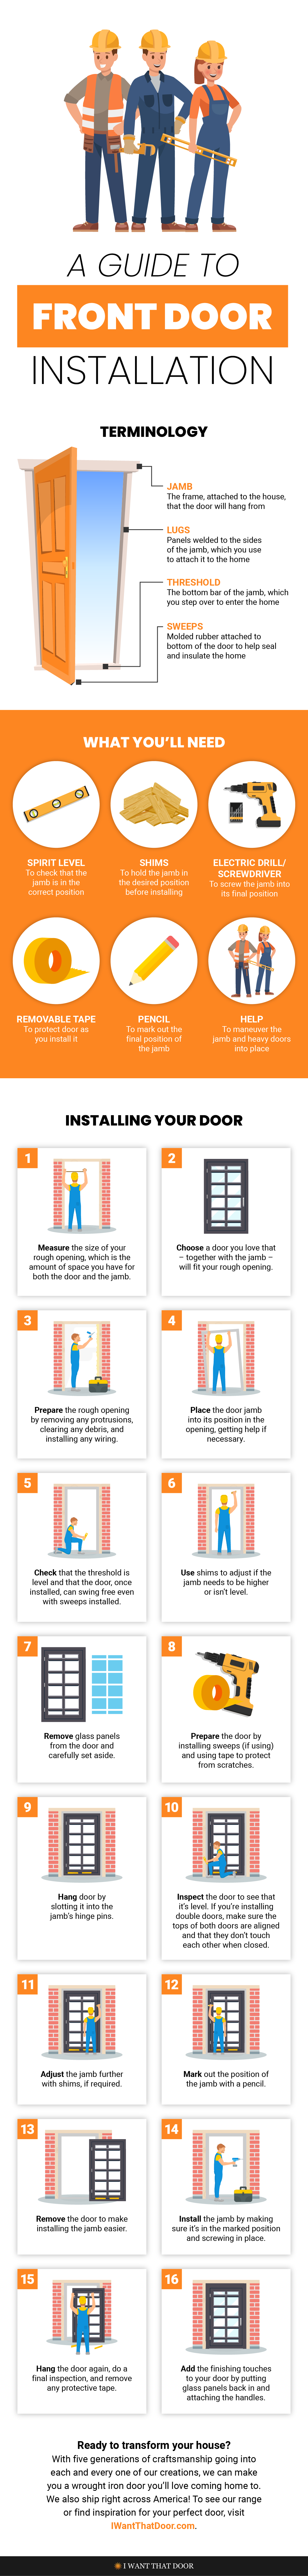 A Guide to Front Door Installation Infographic